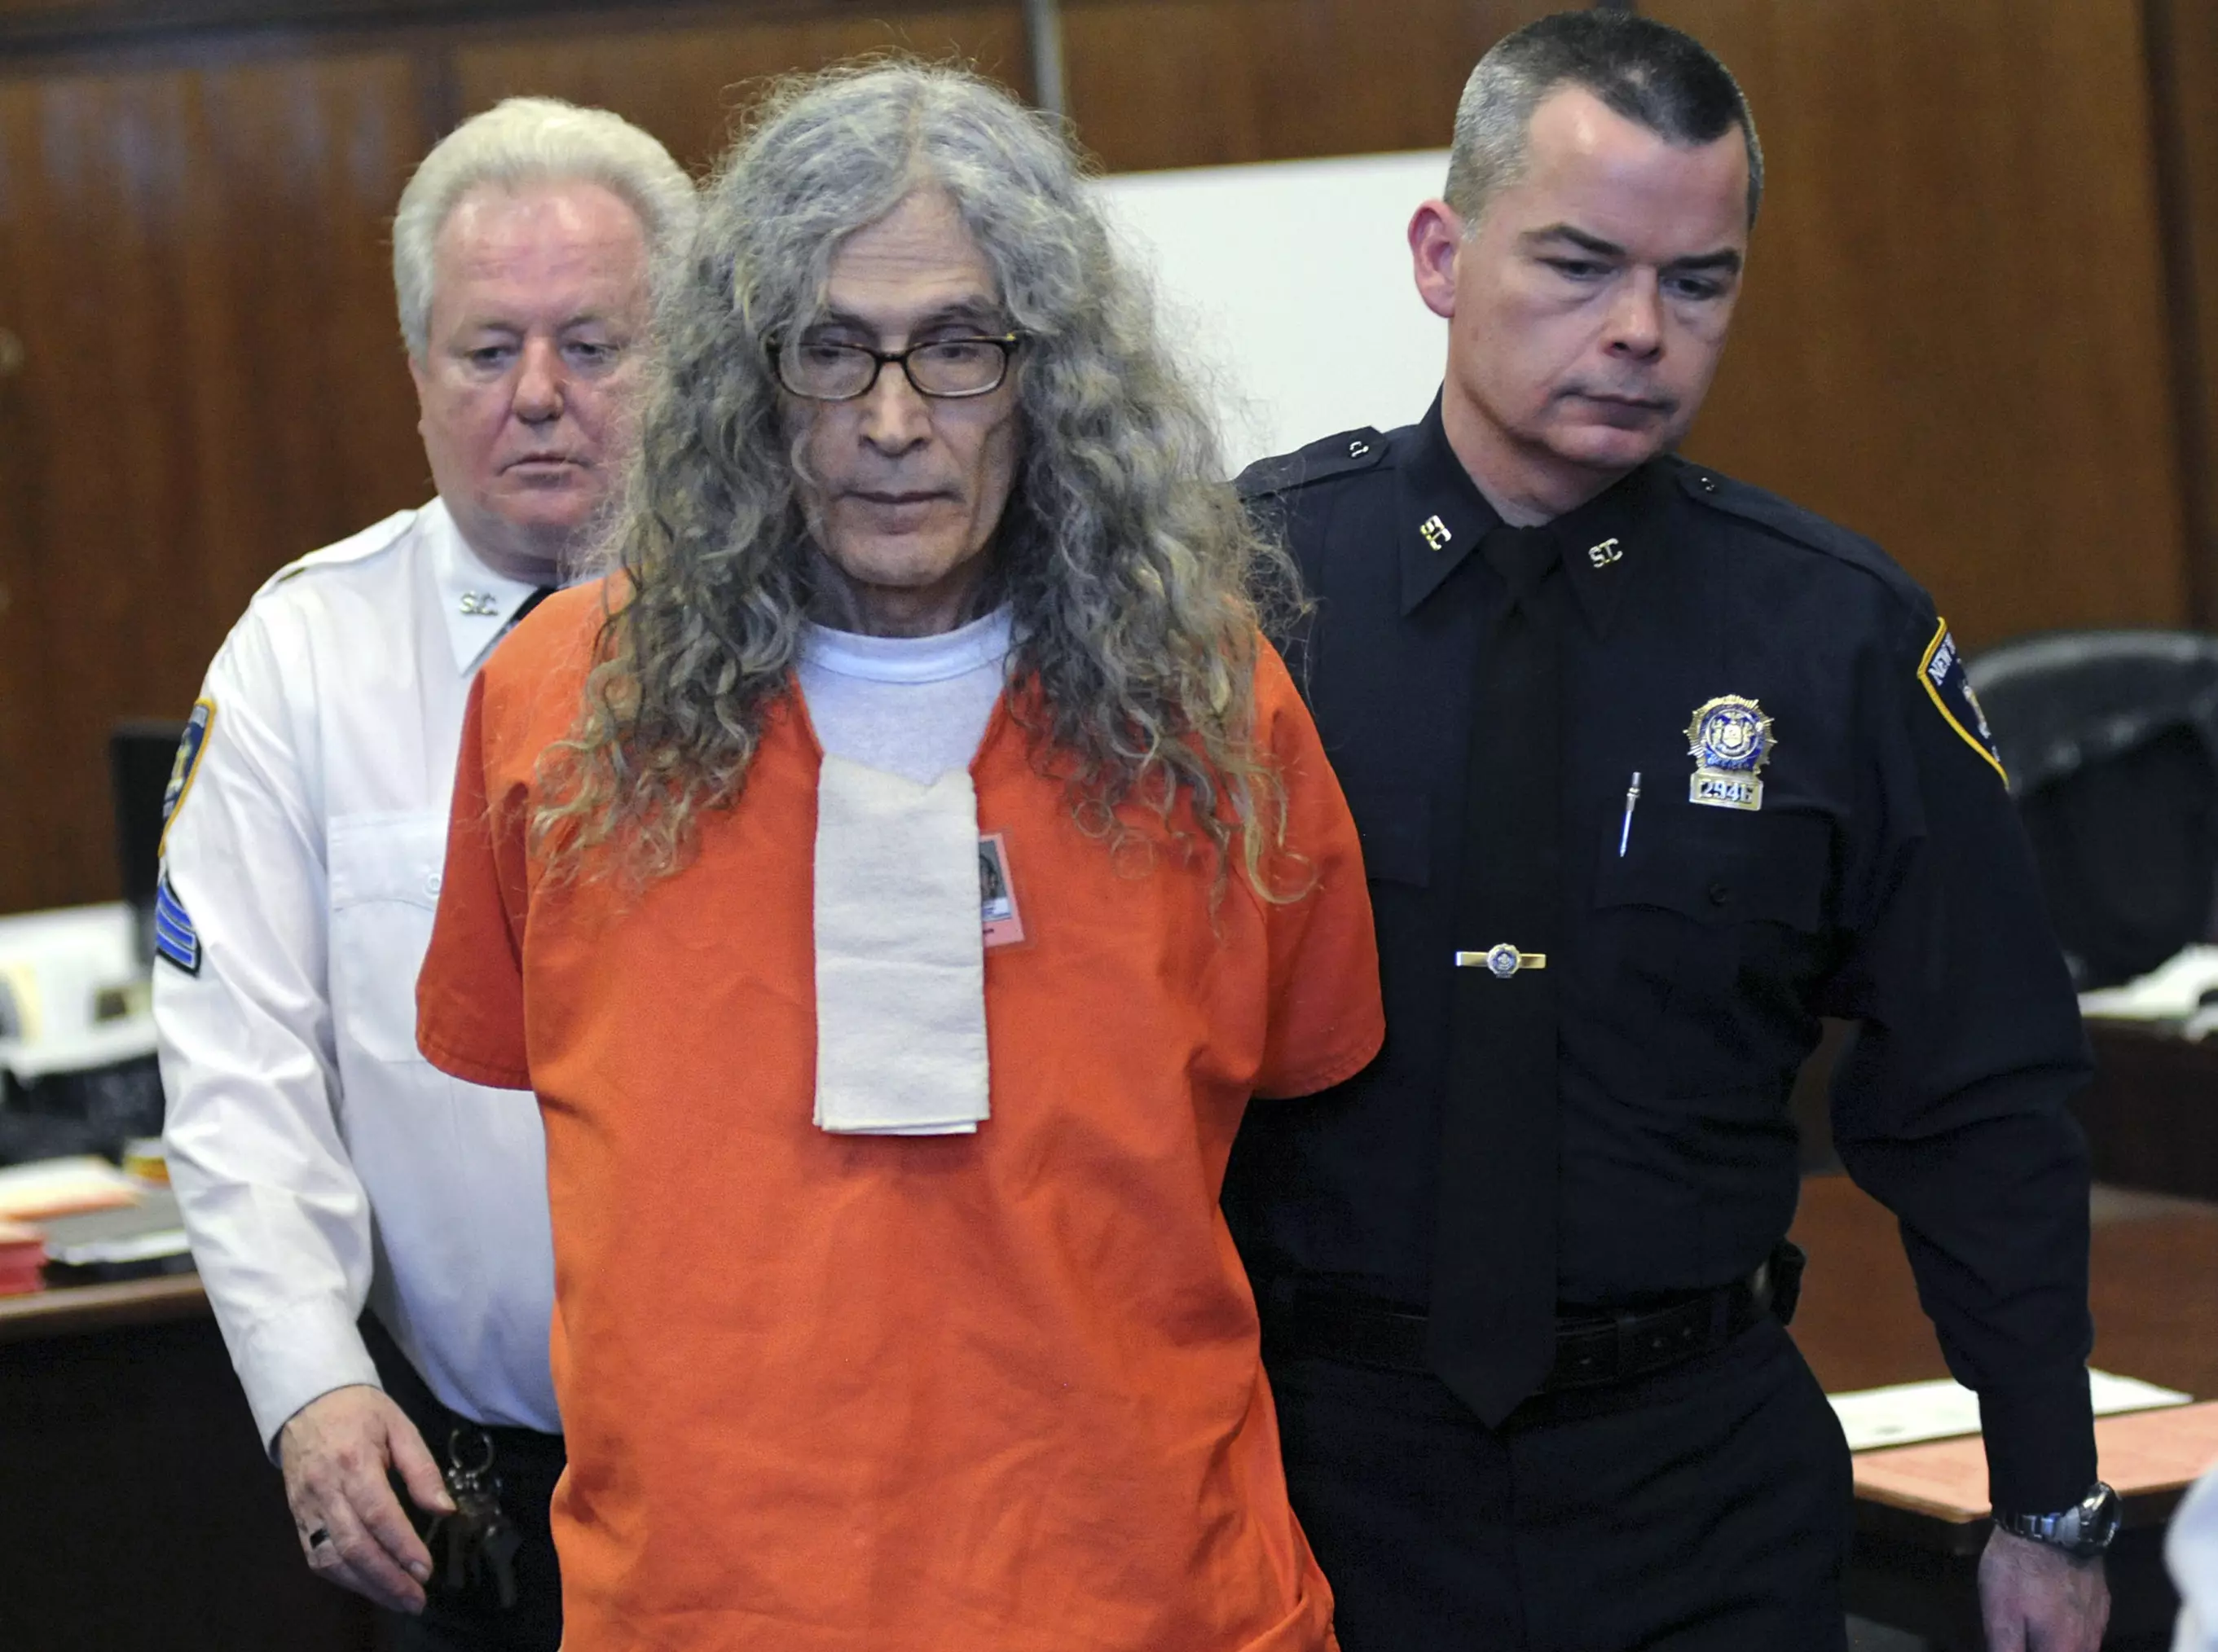 Rodney Alcala appears in court in New York in 2013. Alcala was sentenced to an additional 25 years to life in prison after pleading guilty to murdering two young women here in the 1970s.